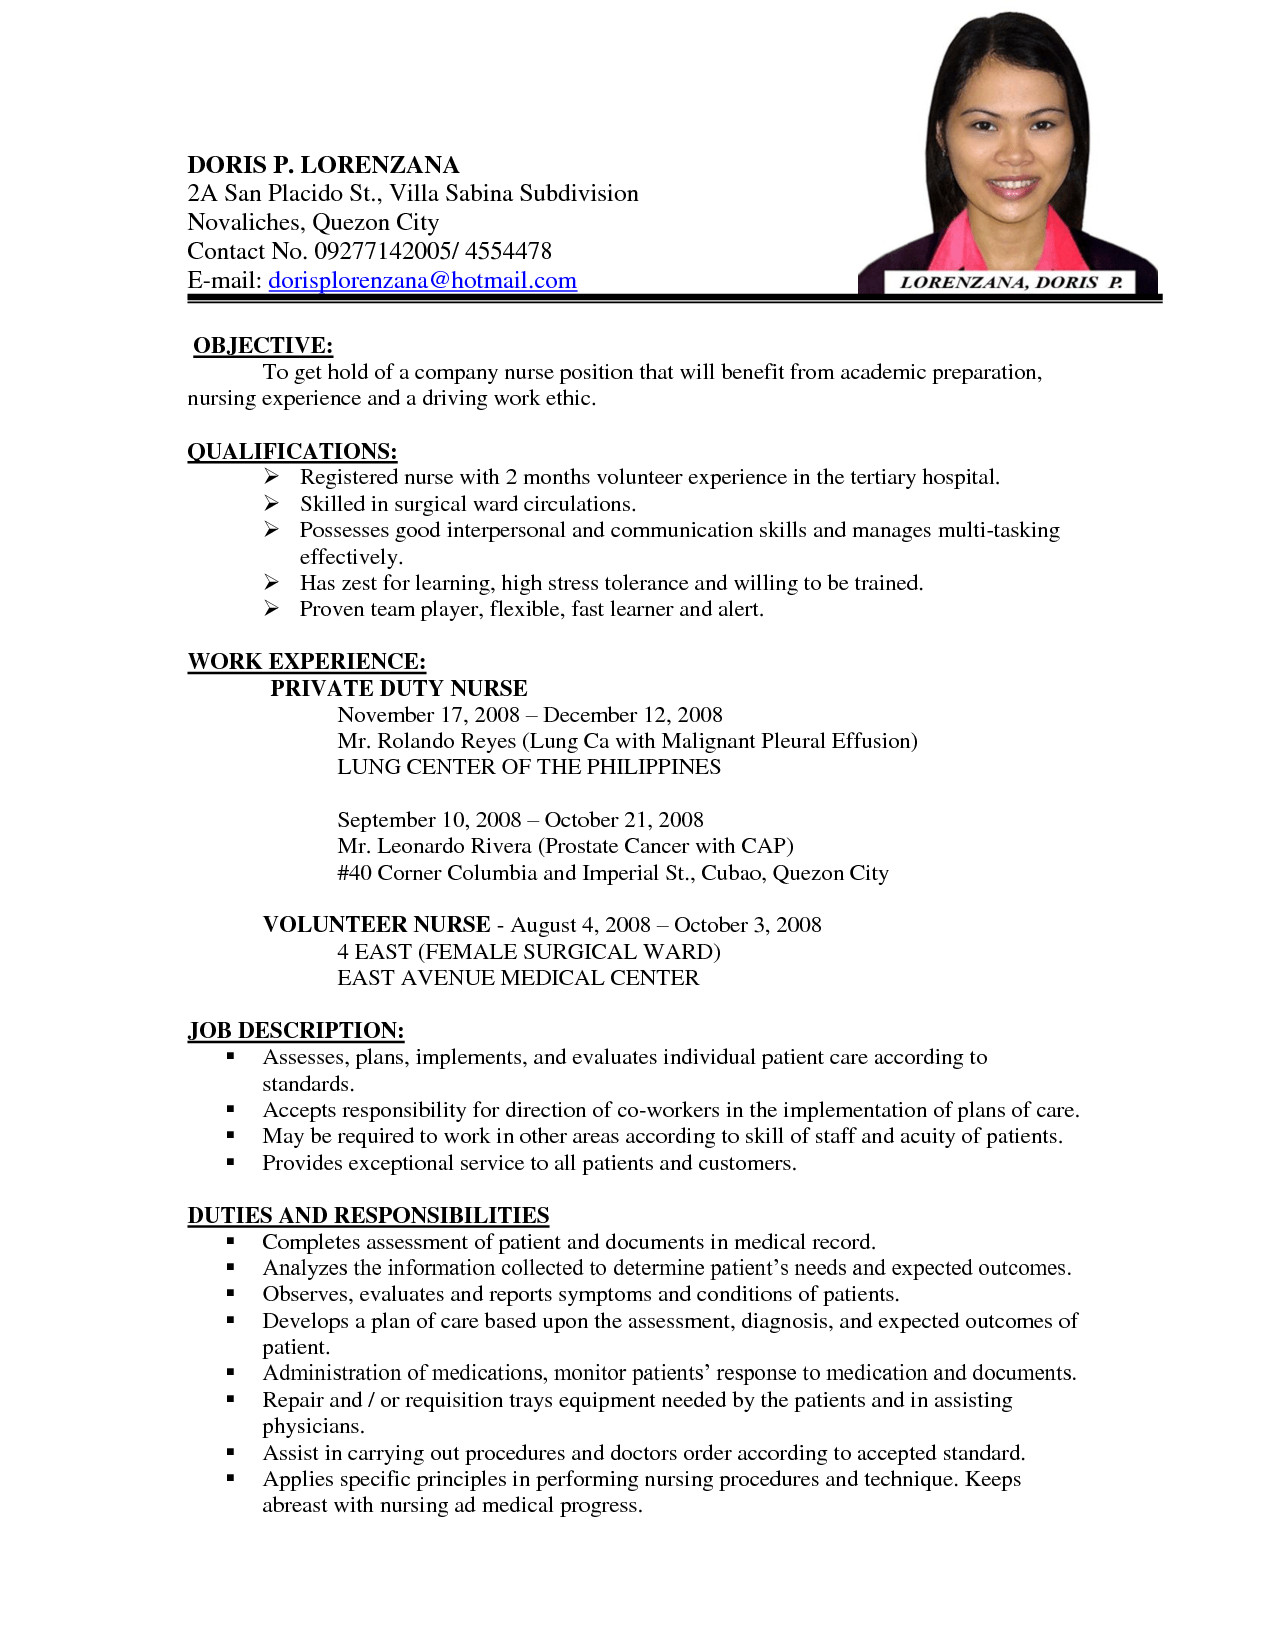 Sample Resume for Elementary Teachers In the Philippines Resume for Teacher Job without Experience Best Resume